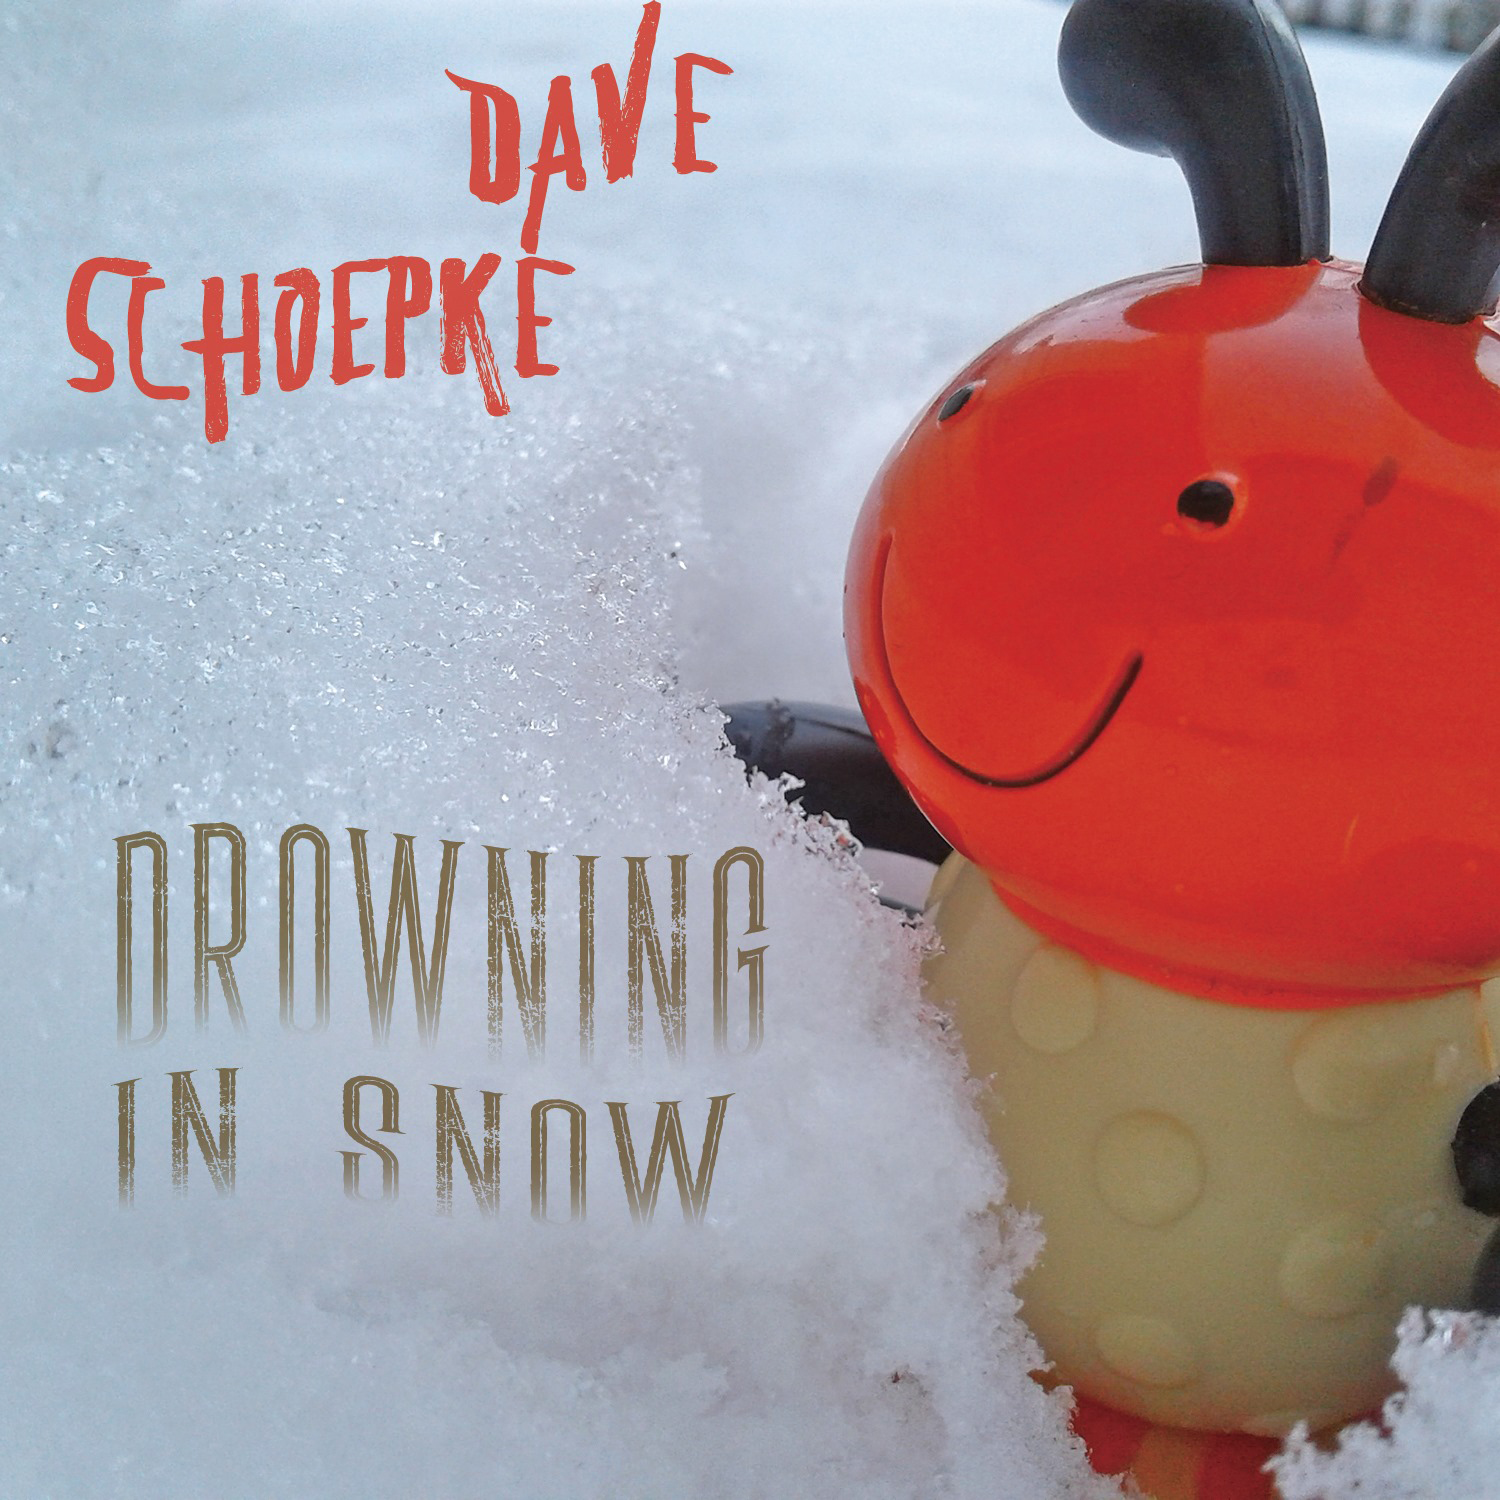 Dave Schoepke – Drowning In Snow